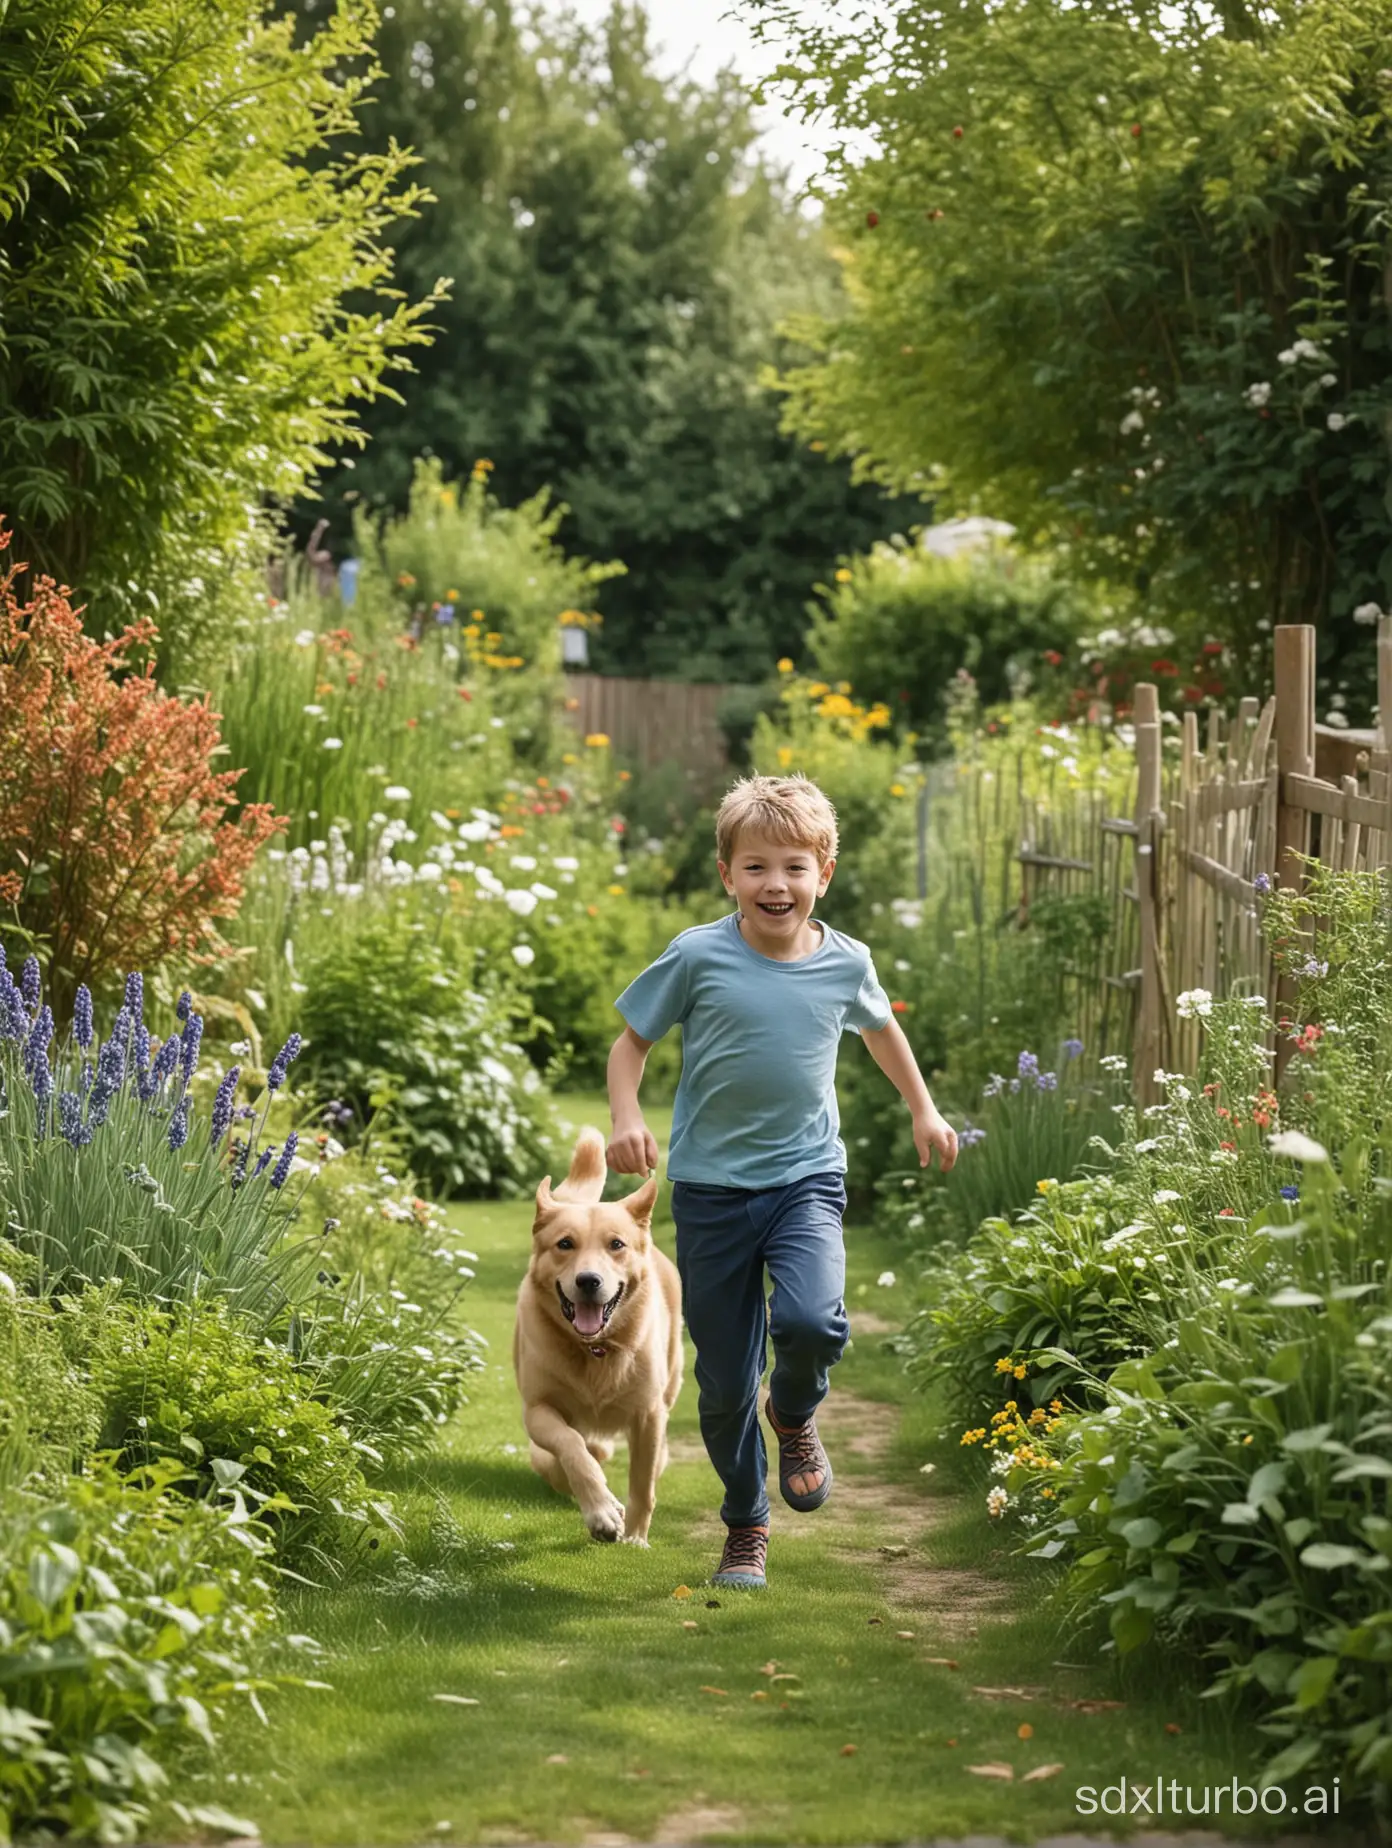 The boy is running in the garden with the dog